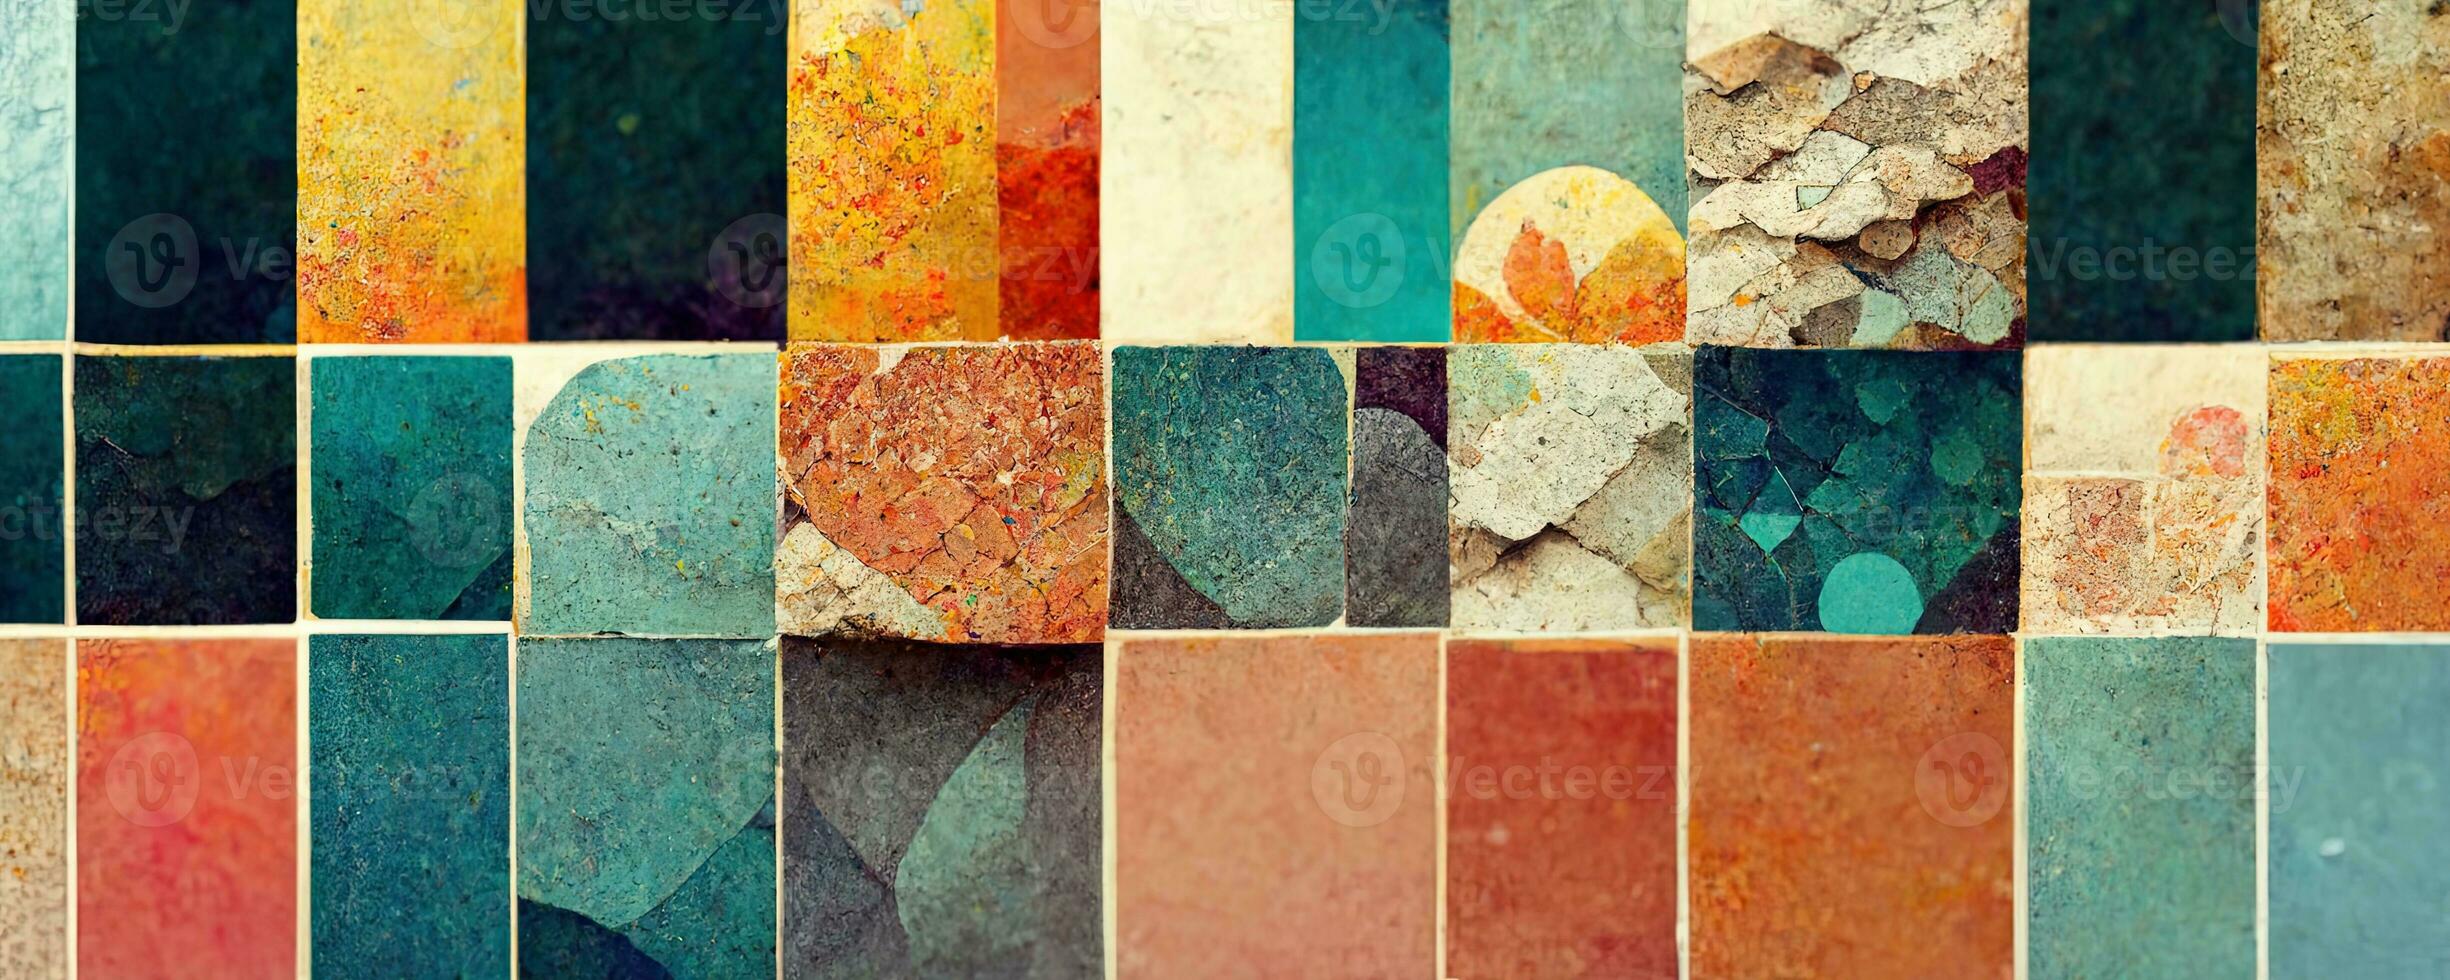 Artistic colorful mosaic pattern. Collage contemporary print with trendy decorative mosaic pattern with different colors, modern art. Banner concept photo